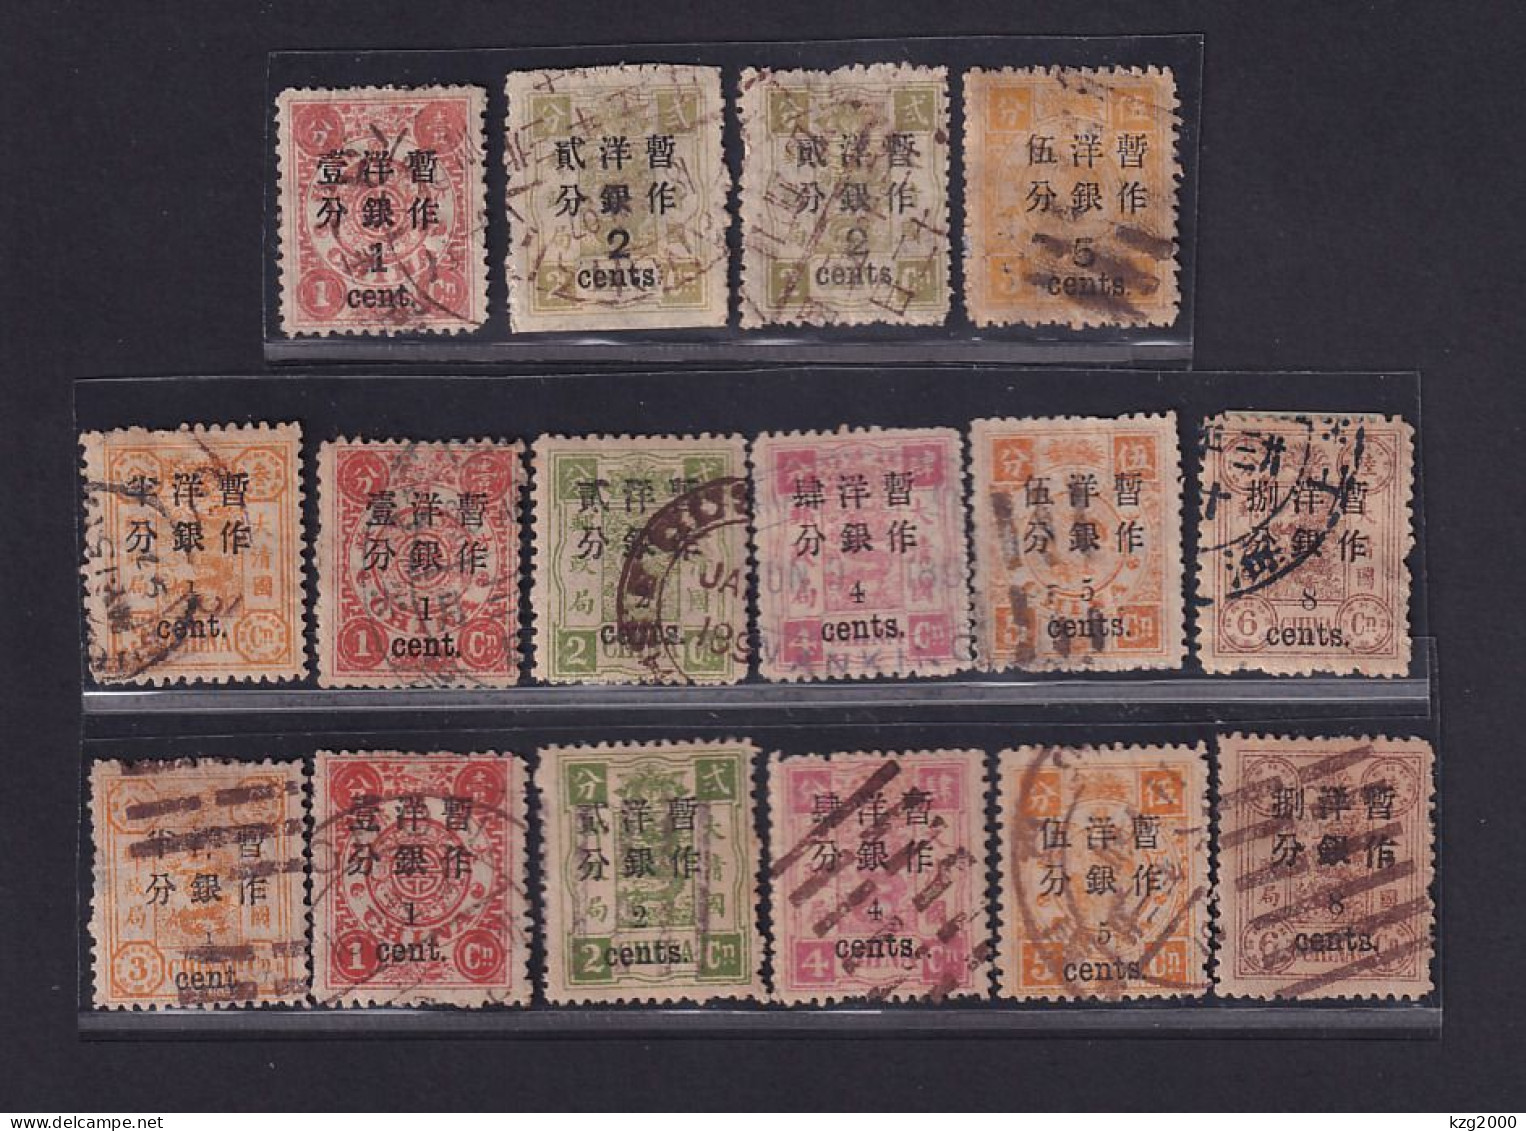 Qing Dynasty China Stamp 1897 Cixi‘s Birthday Commemorative Surcharged 16 Used Stamps - Gebraucht